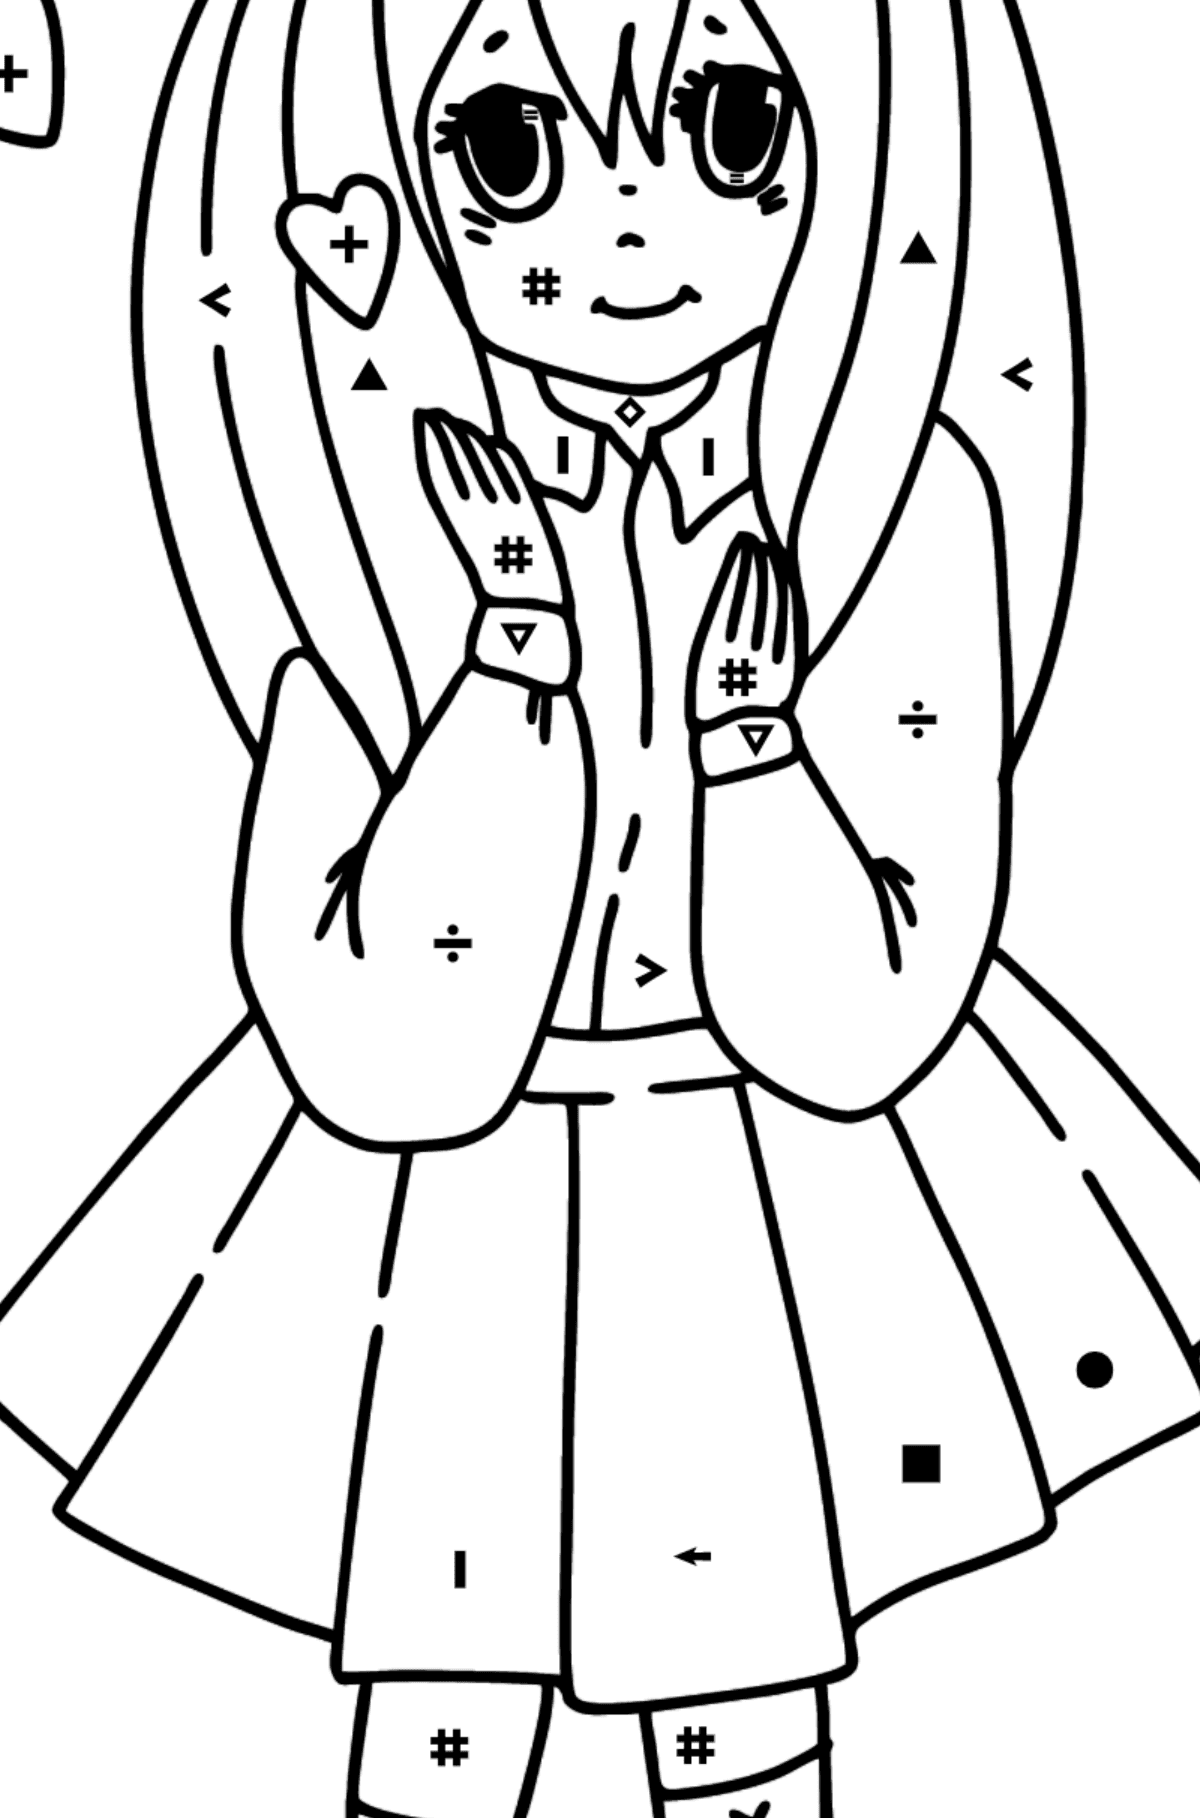 Anime girl in love coloring page - Coloring by Symbols for Kids